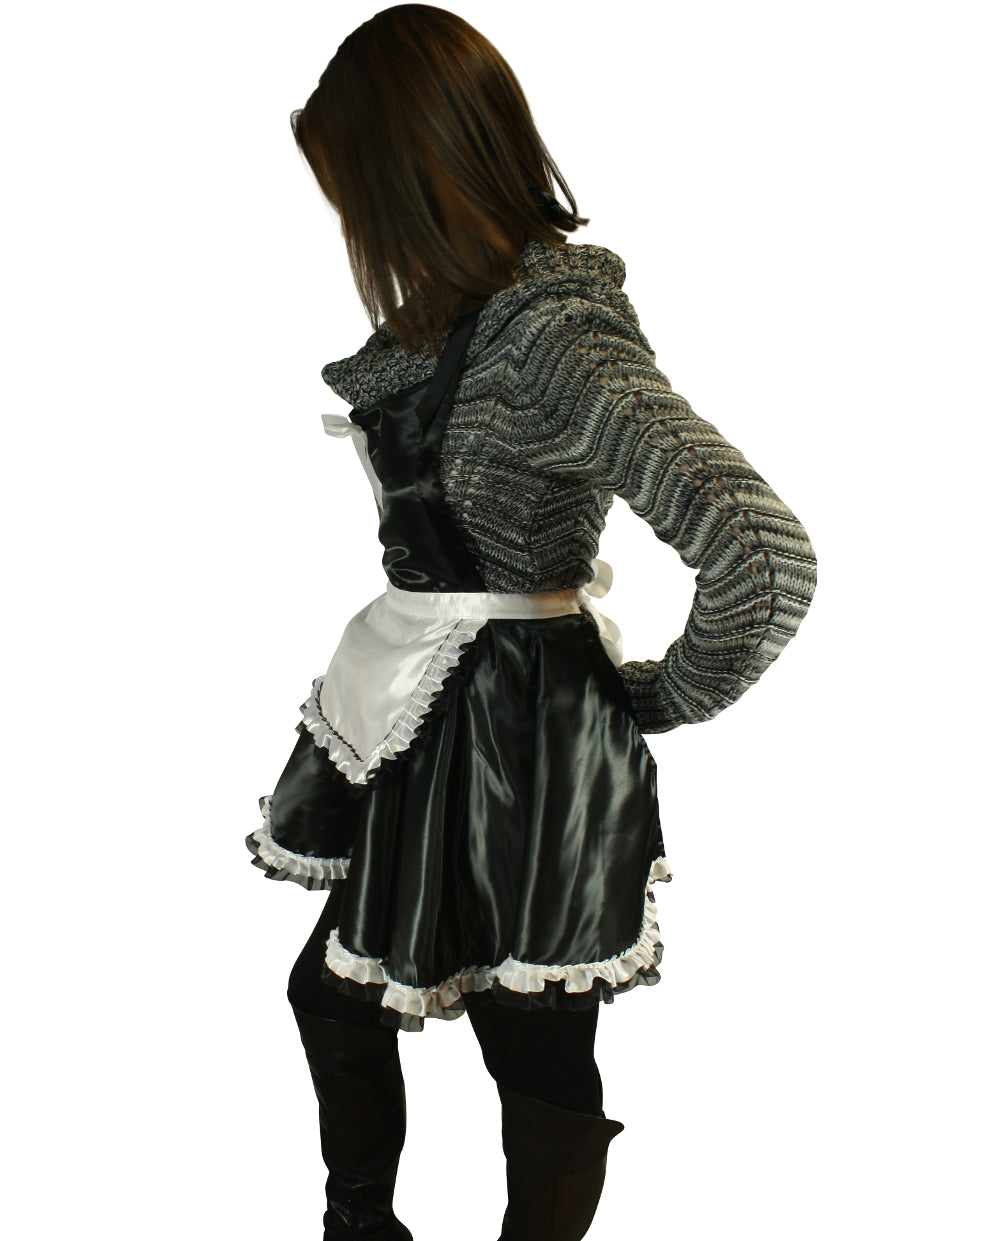 Maid Costume for Halloween or Cosplay or Date Night